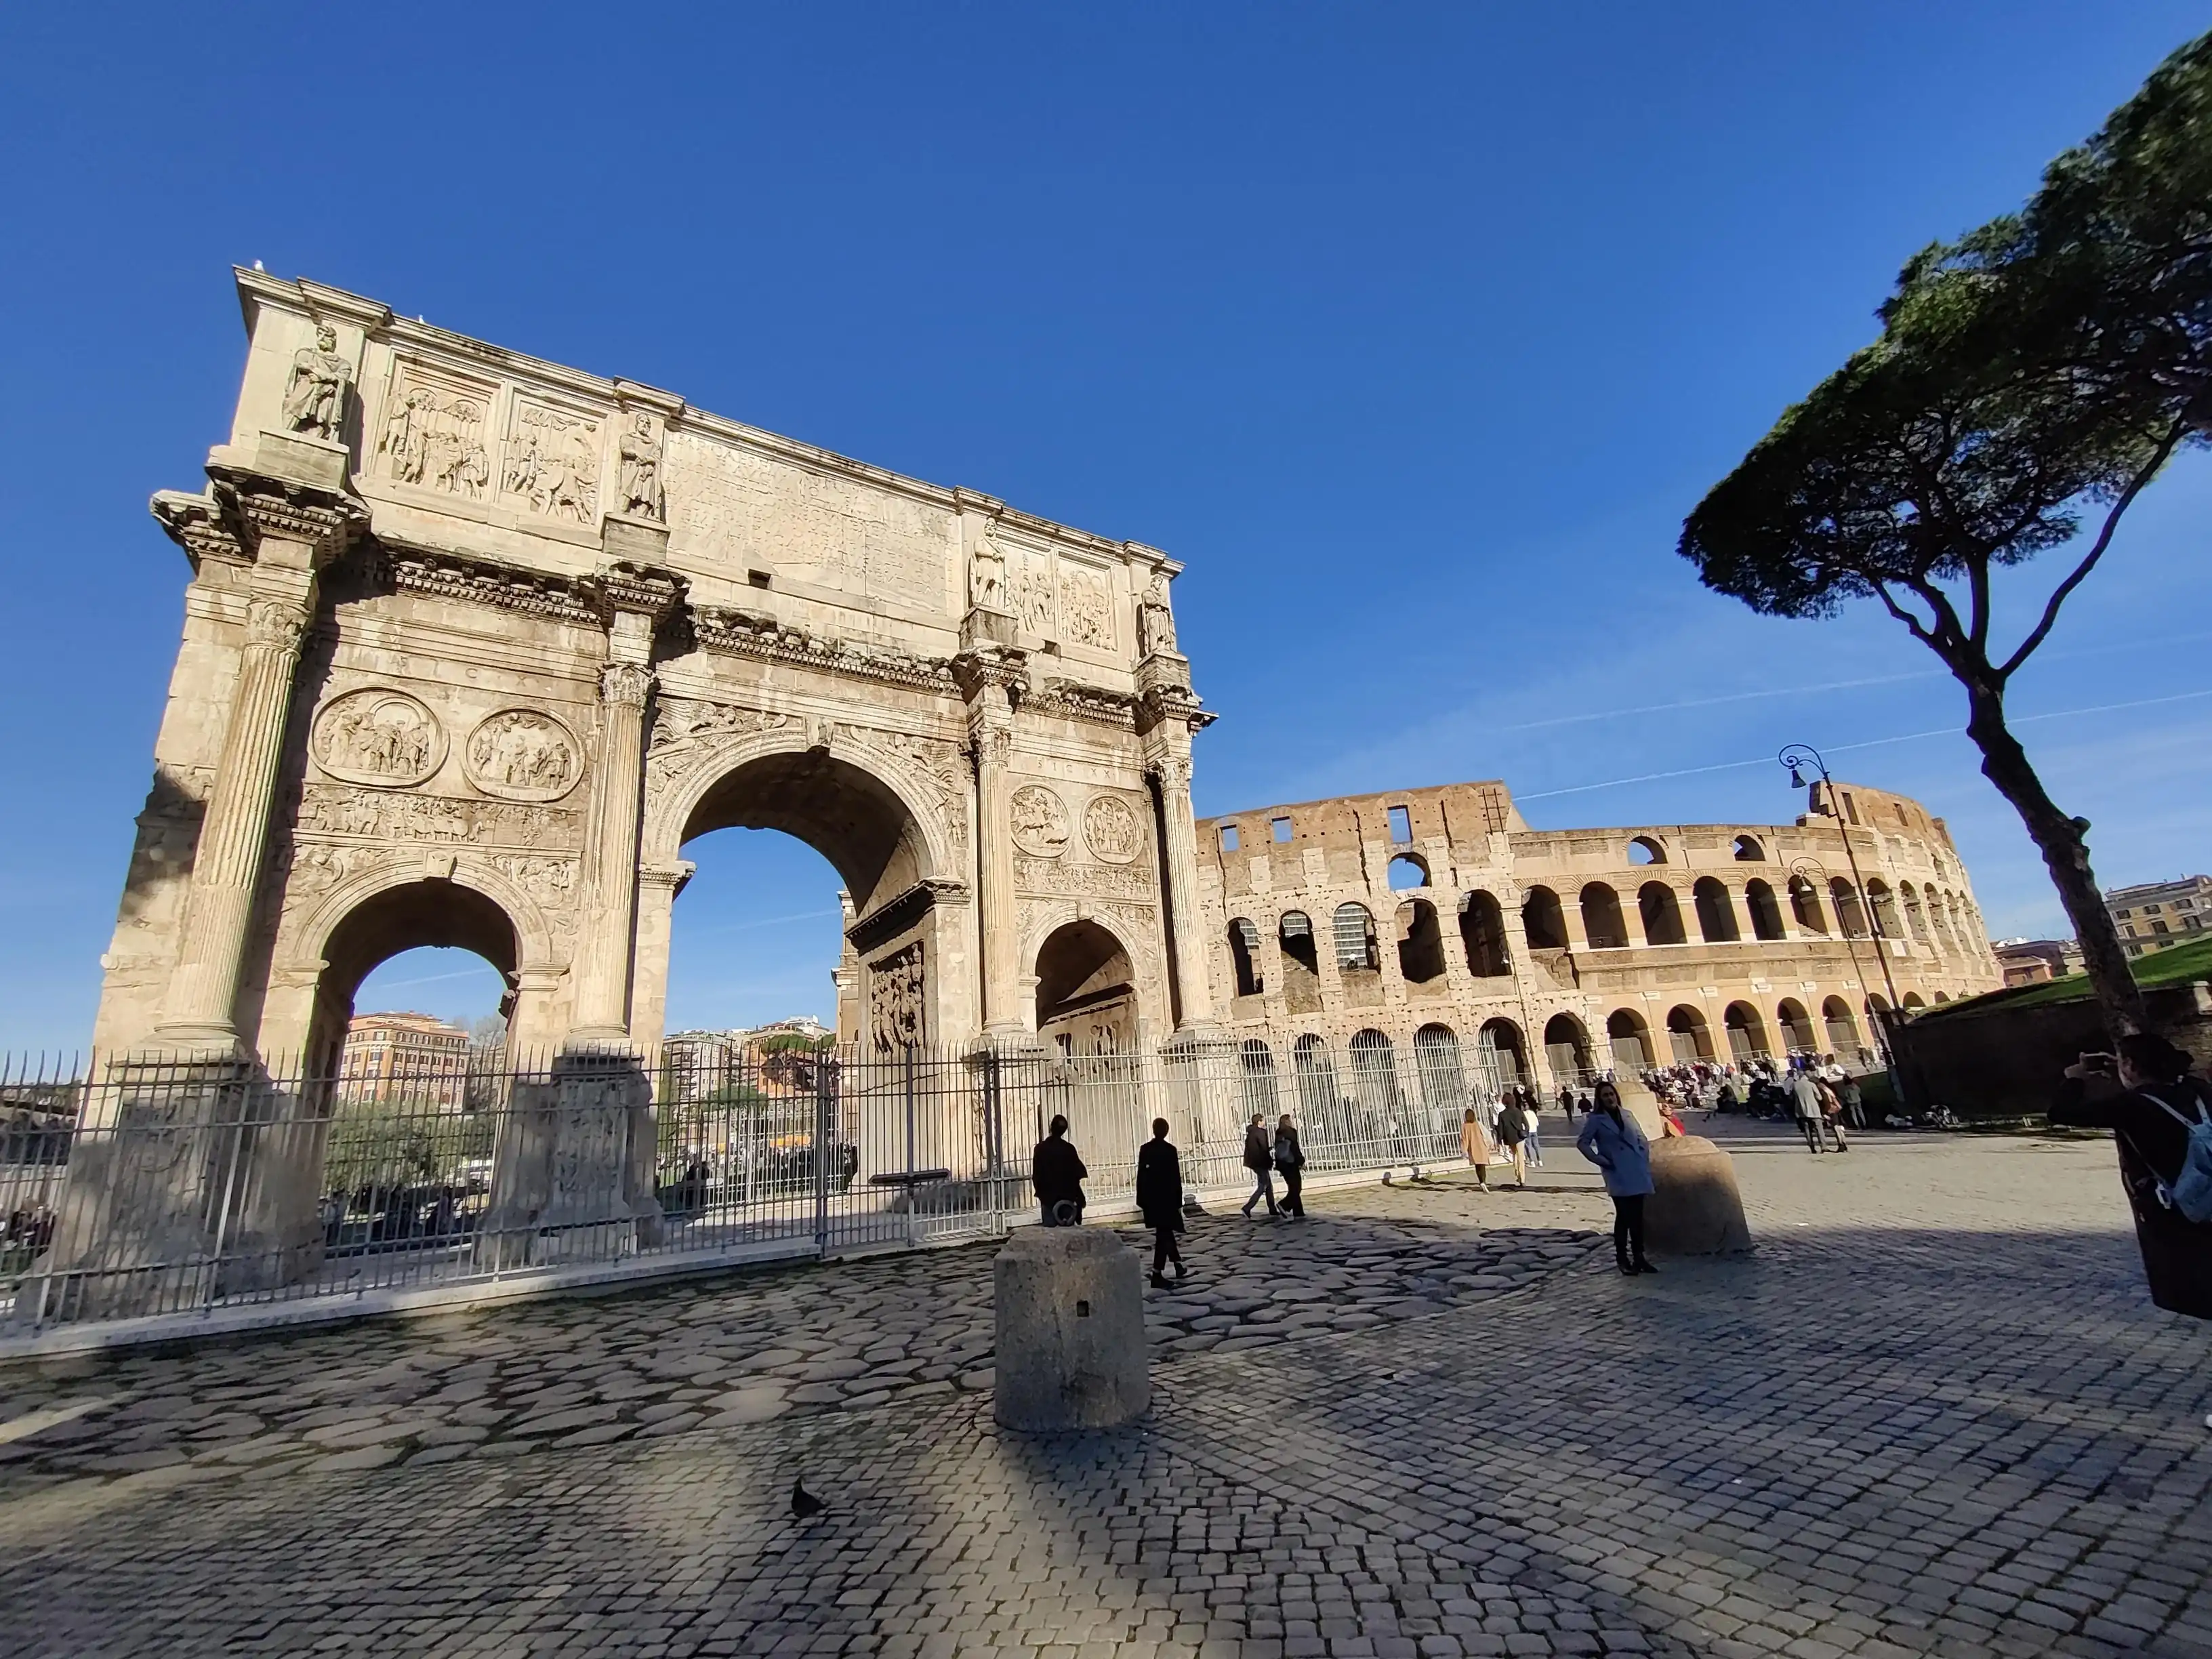 The Coloseum and Arch of Constantine